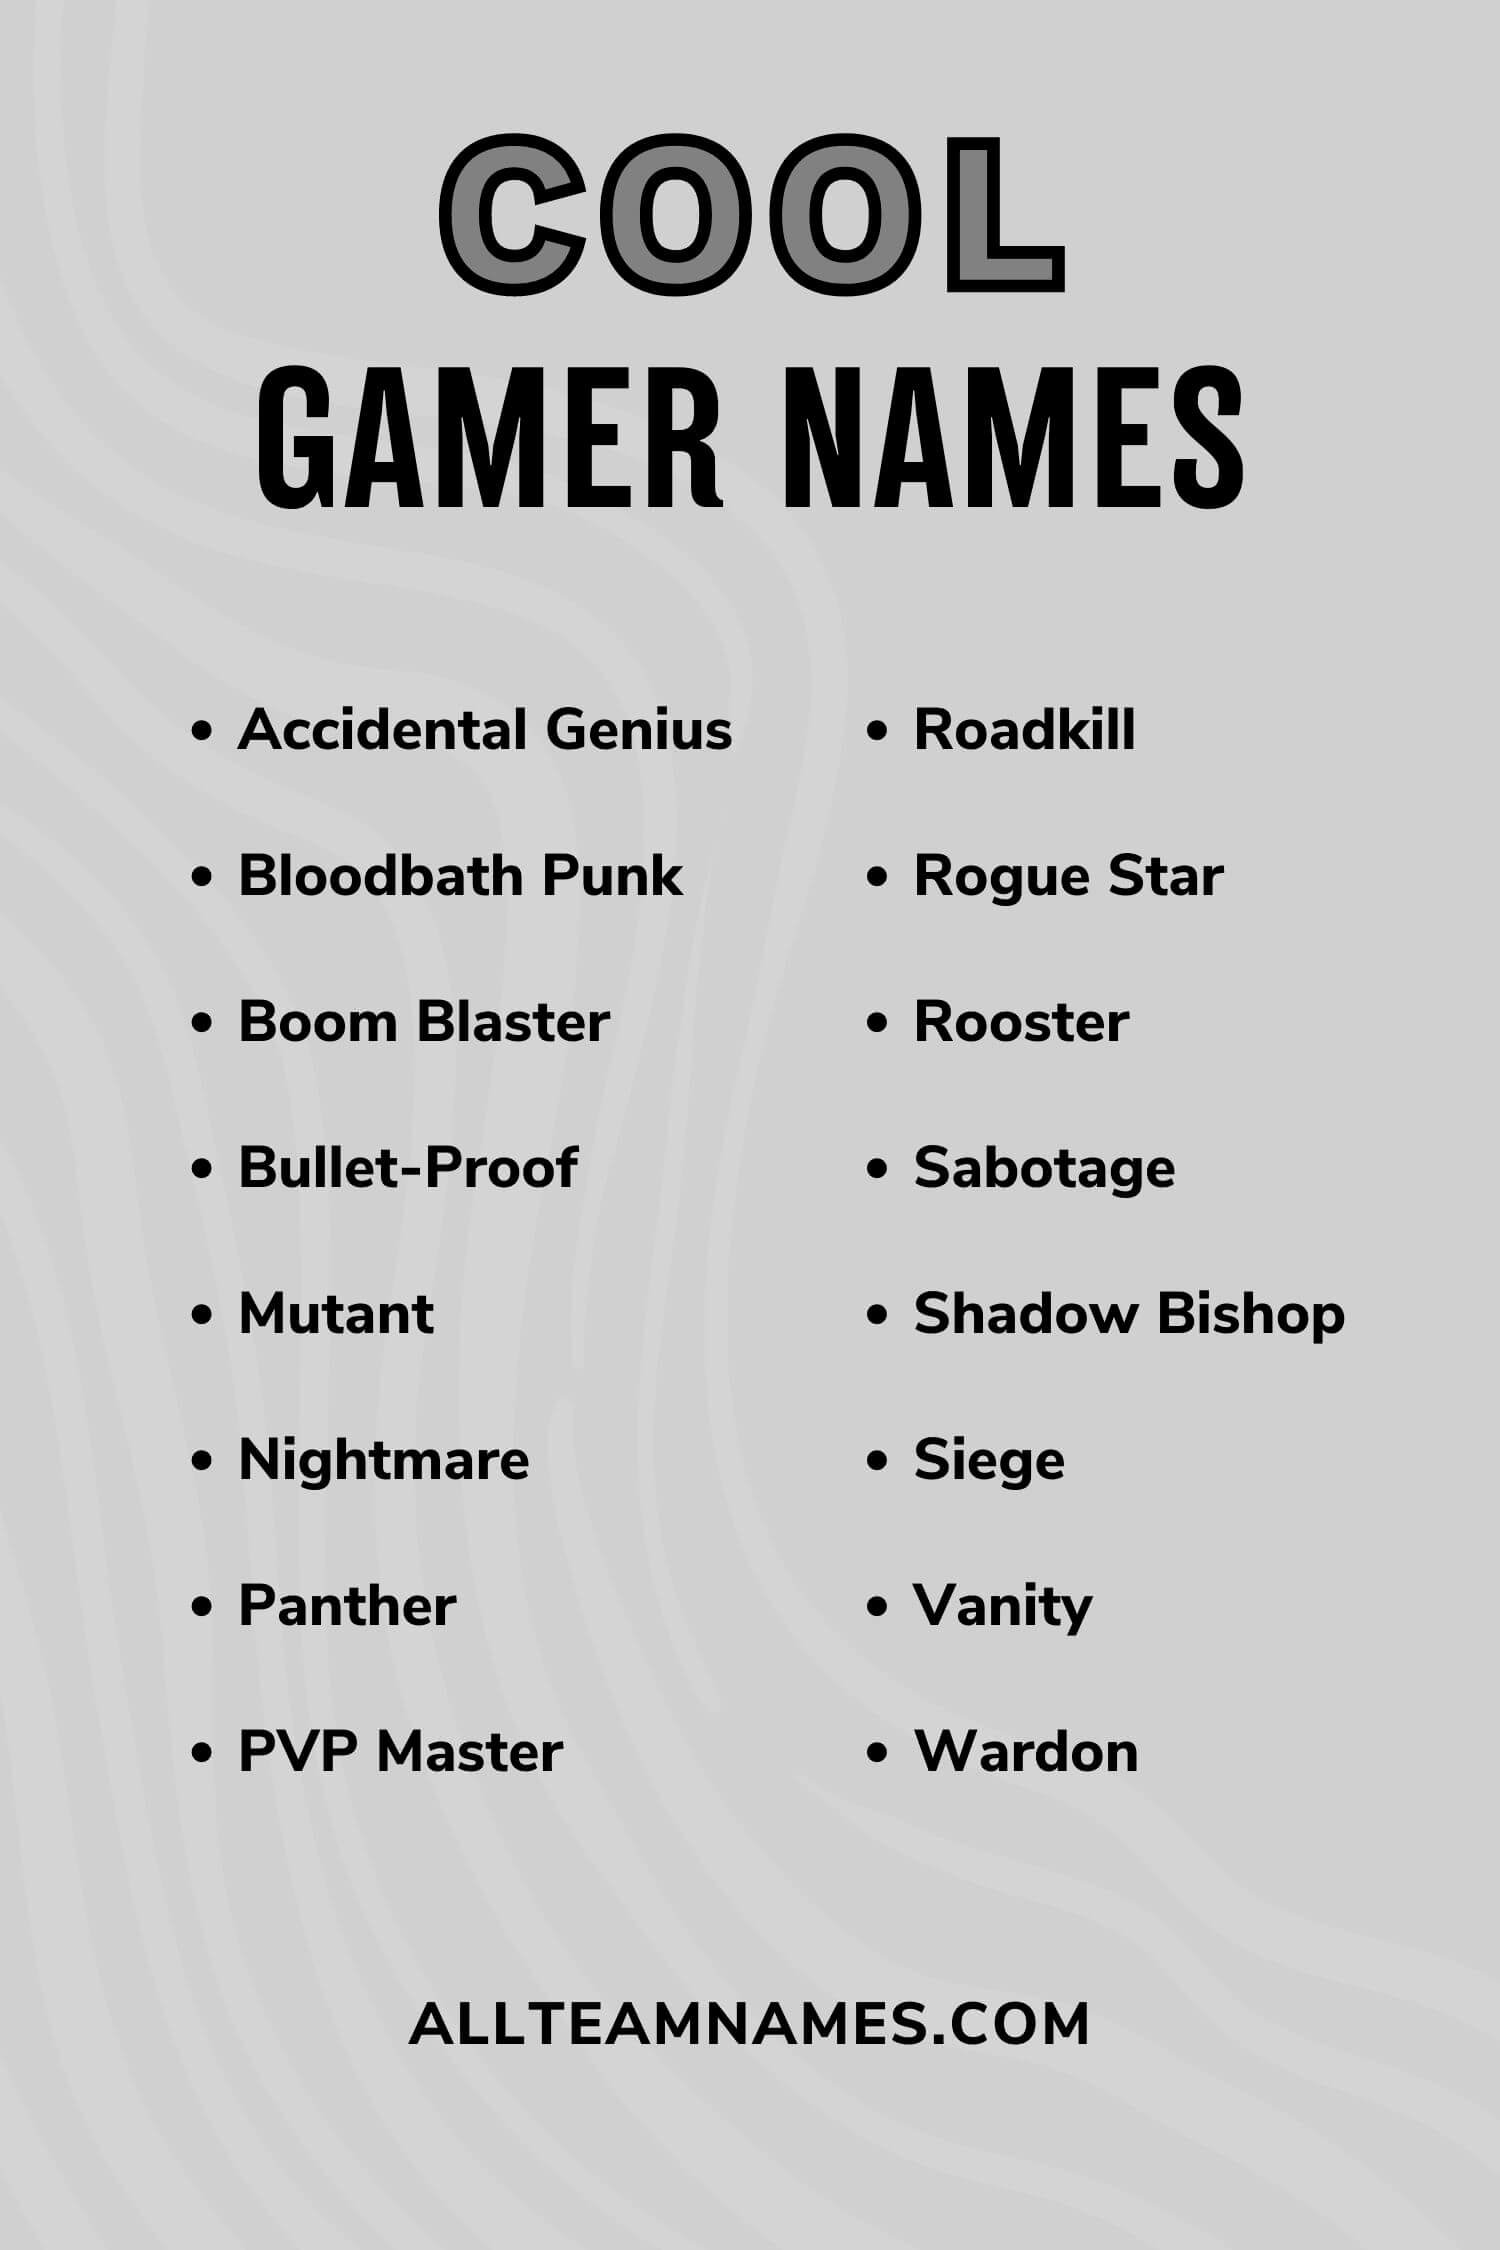 240+ Funny, Best Gaming Names so you can game in style!